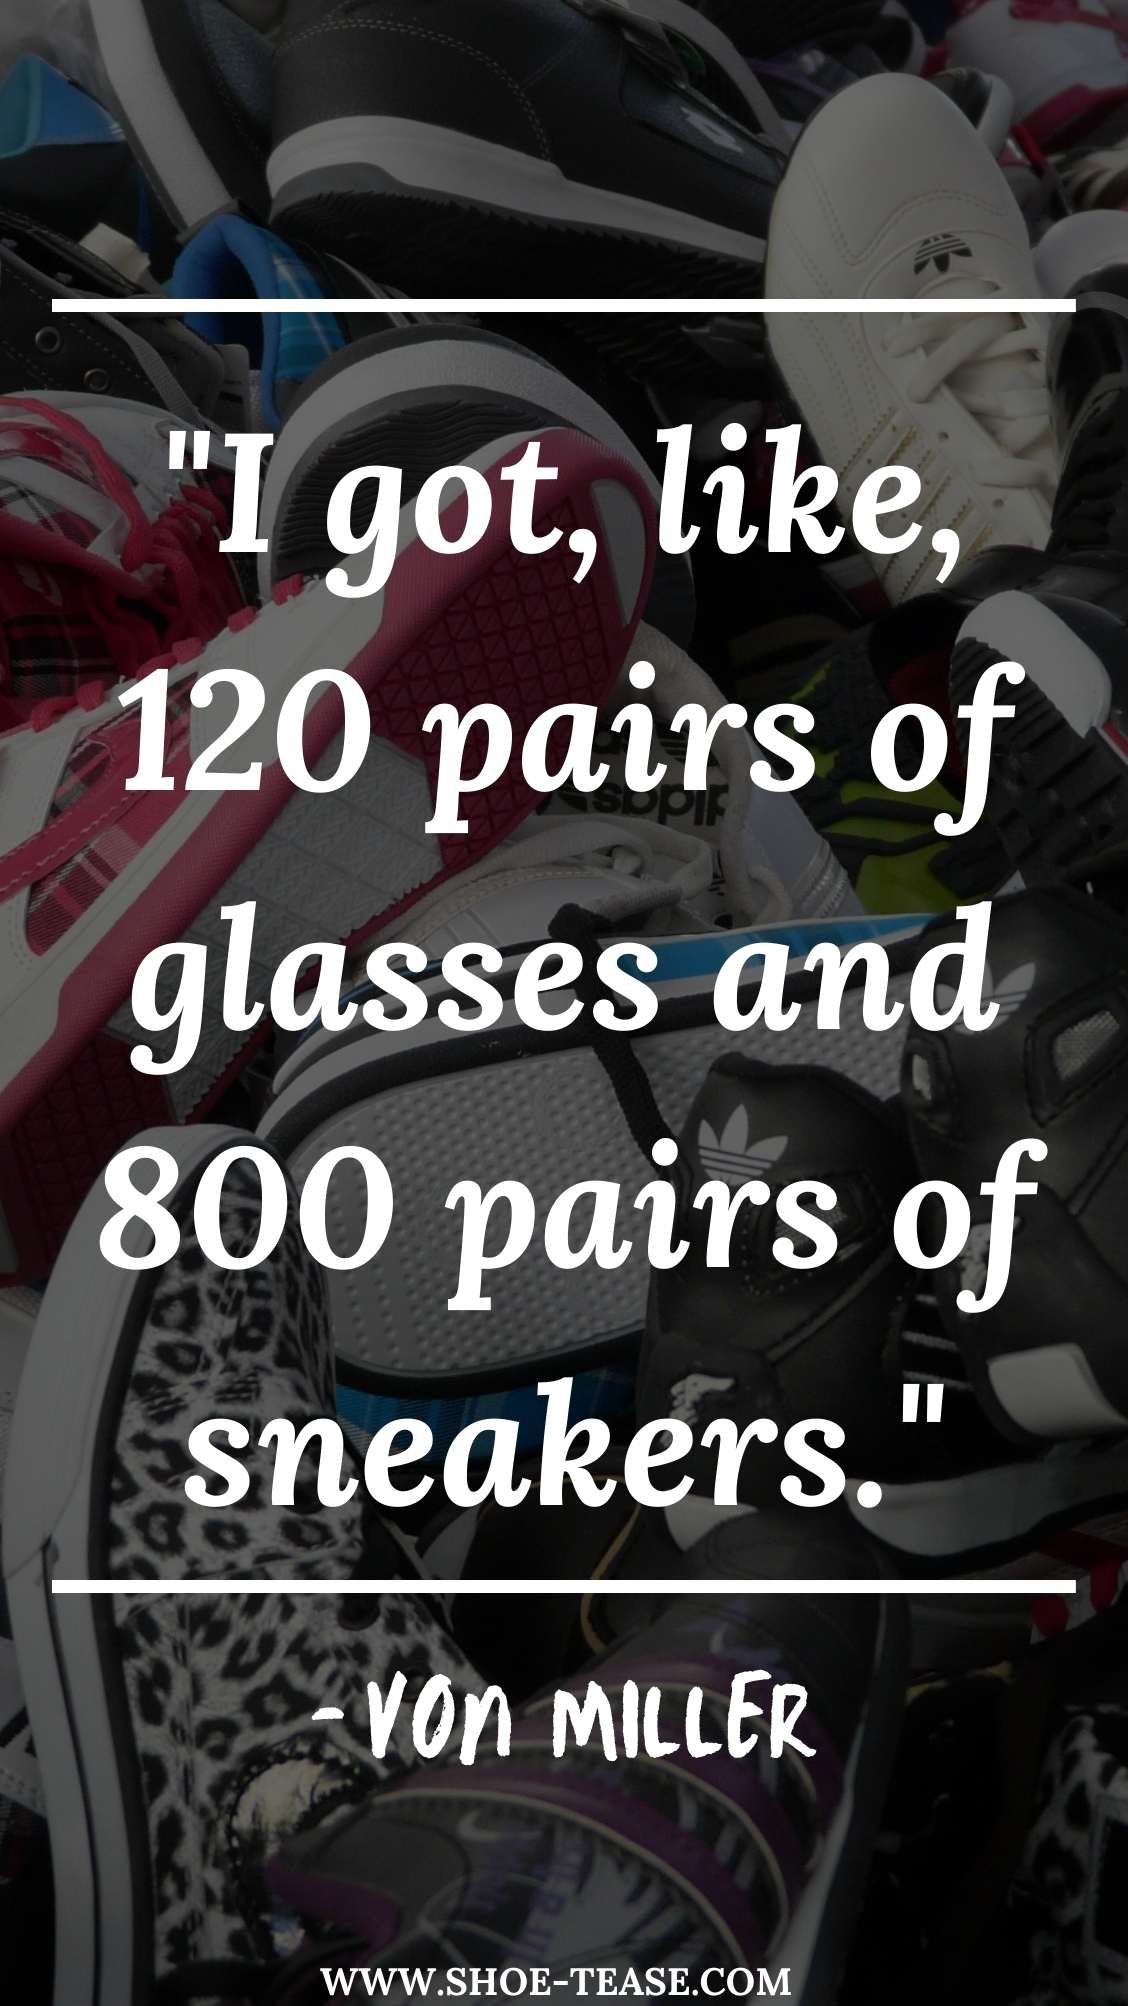 Sneakers Quote reading I got, like 120 pairs of glasses and 800 pairs of sneakers over a variety of sneakers